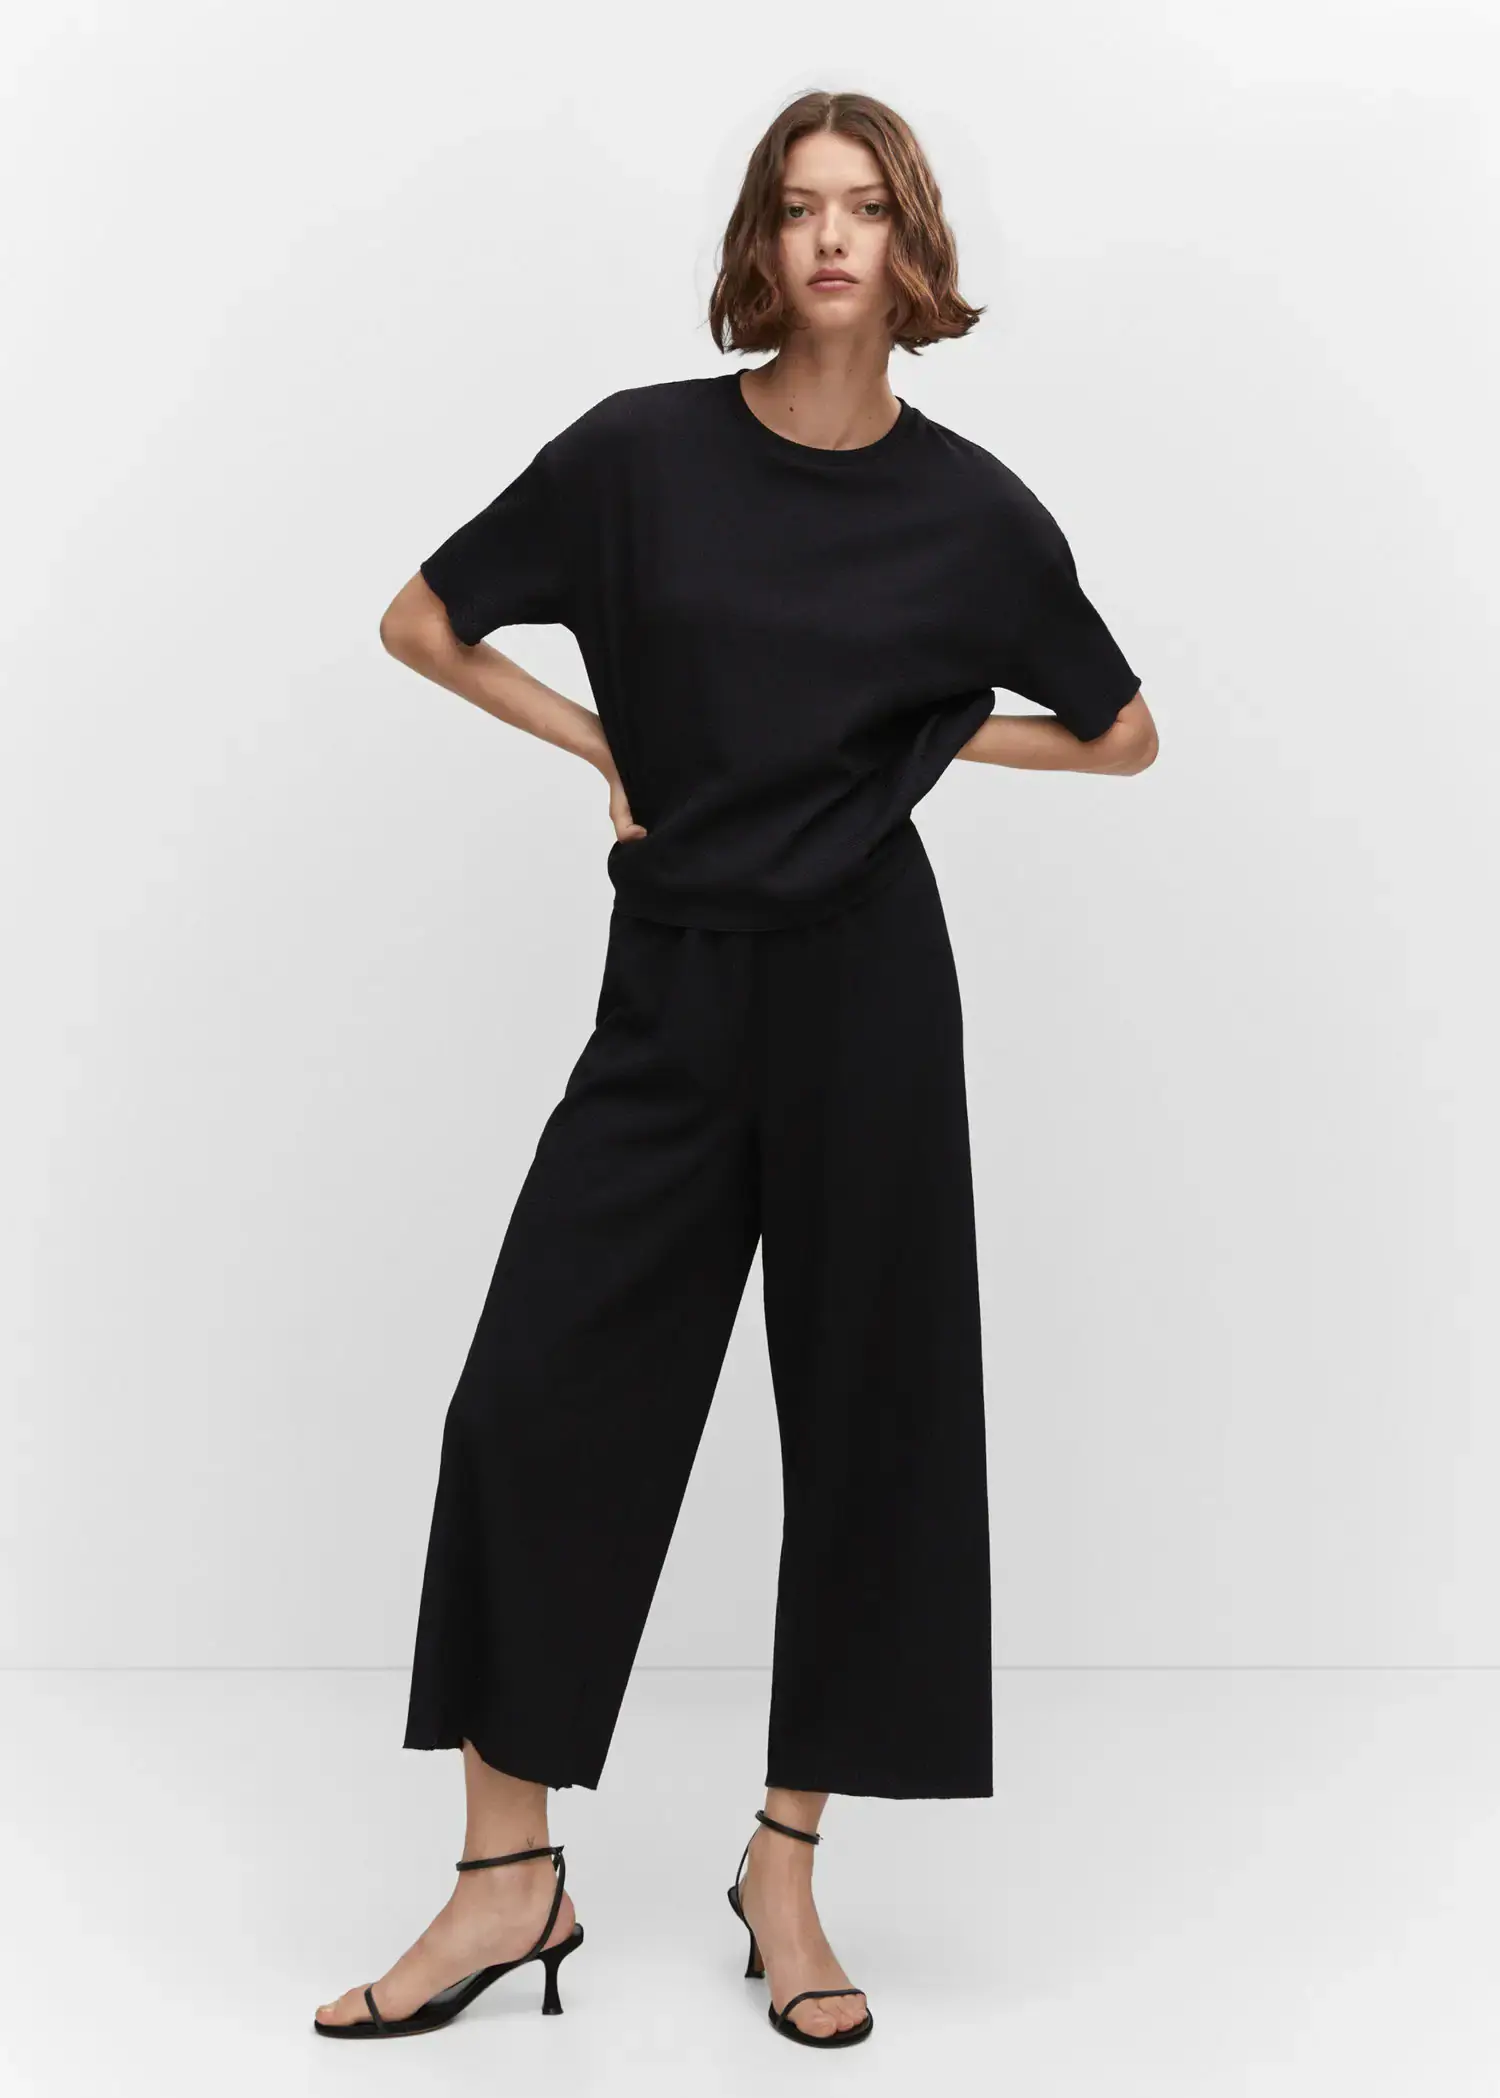 Mango Oversized textured t-shirt. a woman in black shirt and pants posing for a picture 